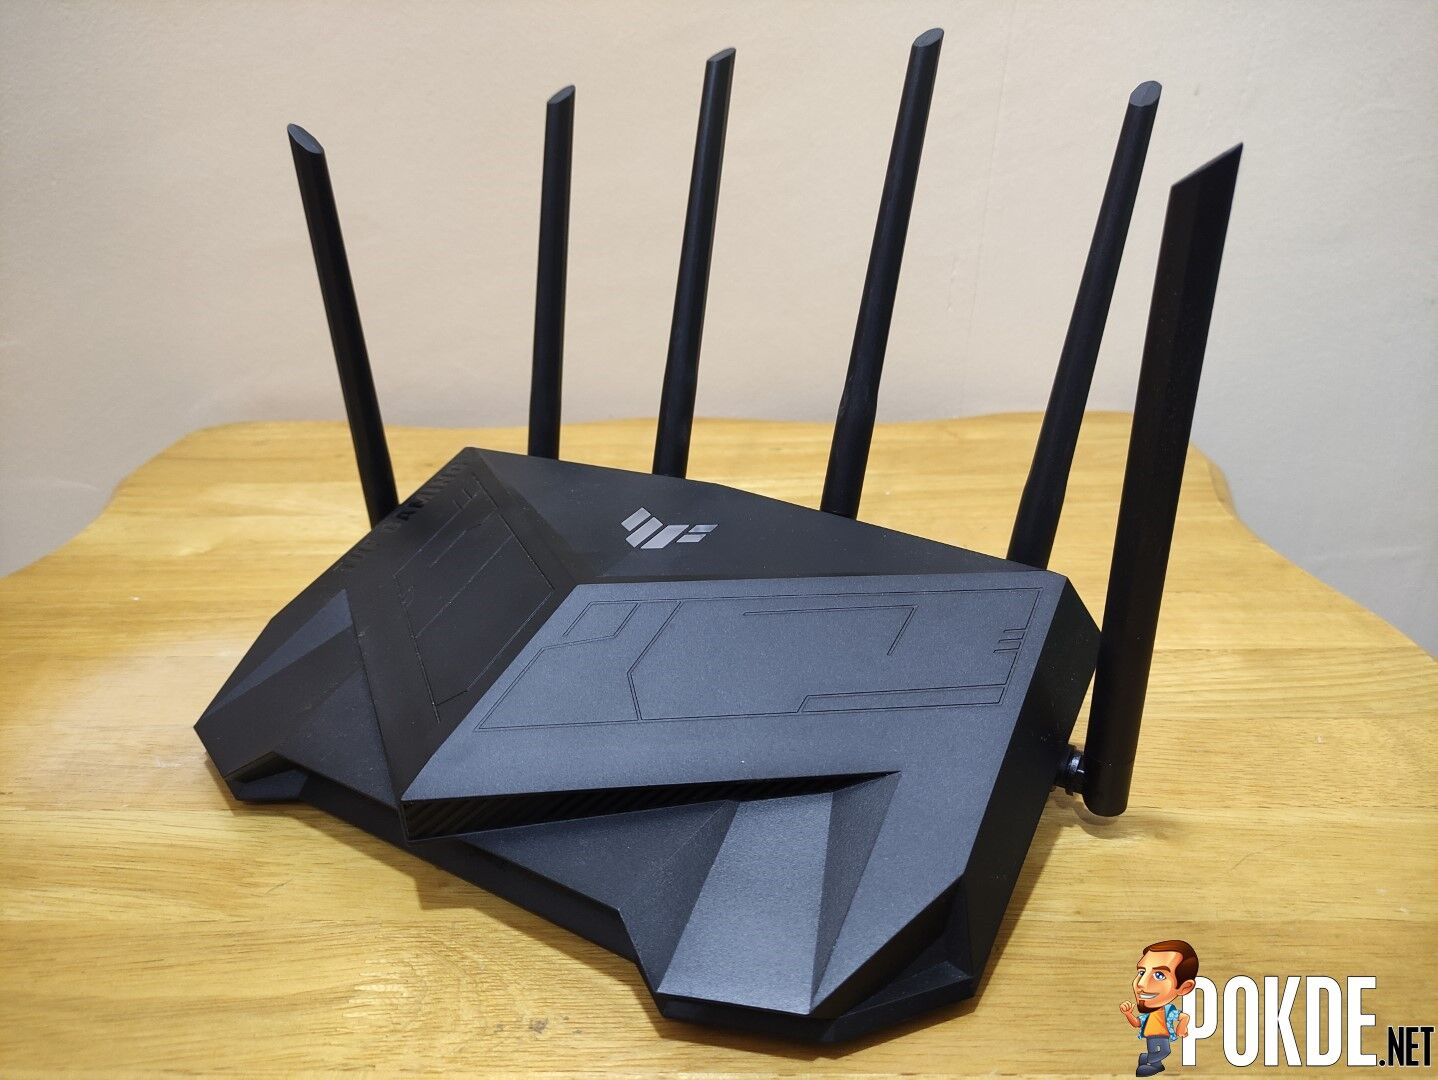 ASUS TUF Gaming AX5400 Router Review - Budget Friendly Router For Your Gaming Needs 45